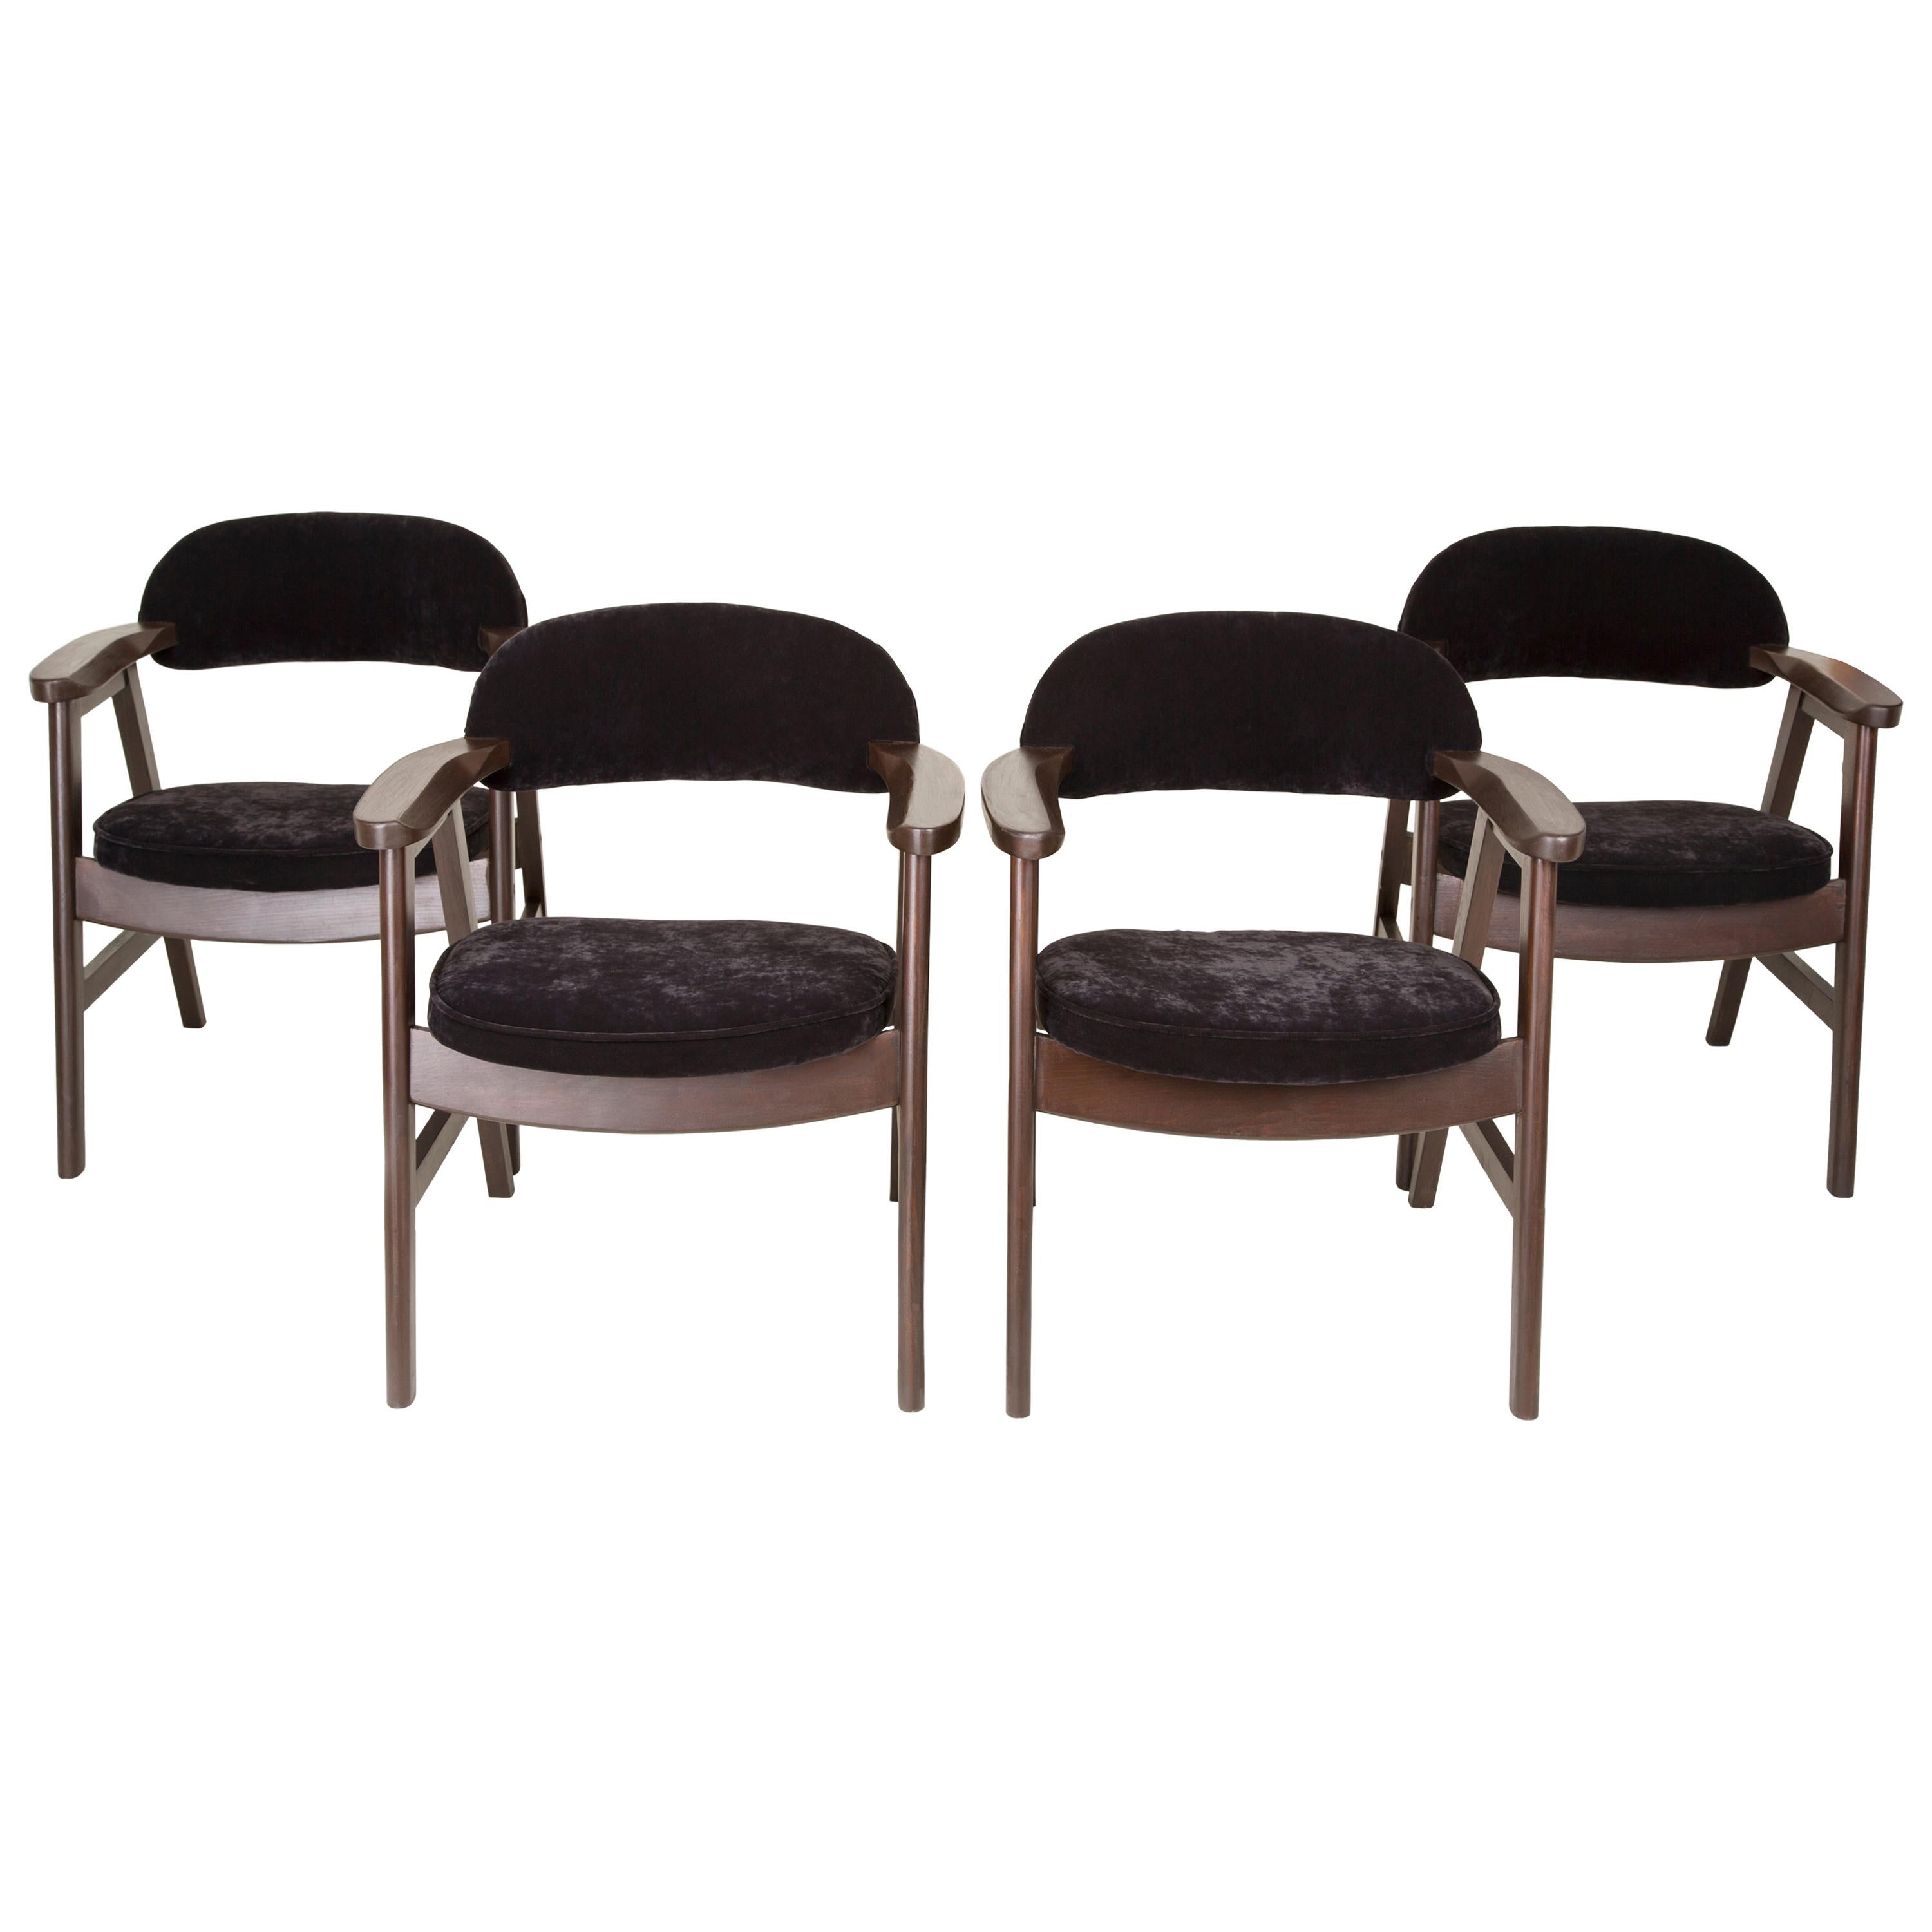 Set of Four 20th Century Buffalo Black Wood and Velvet Chairs, 1960s